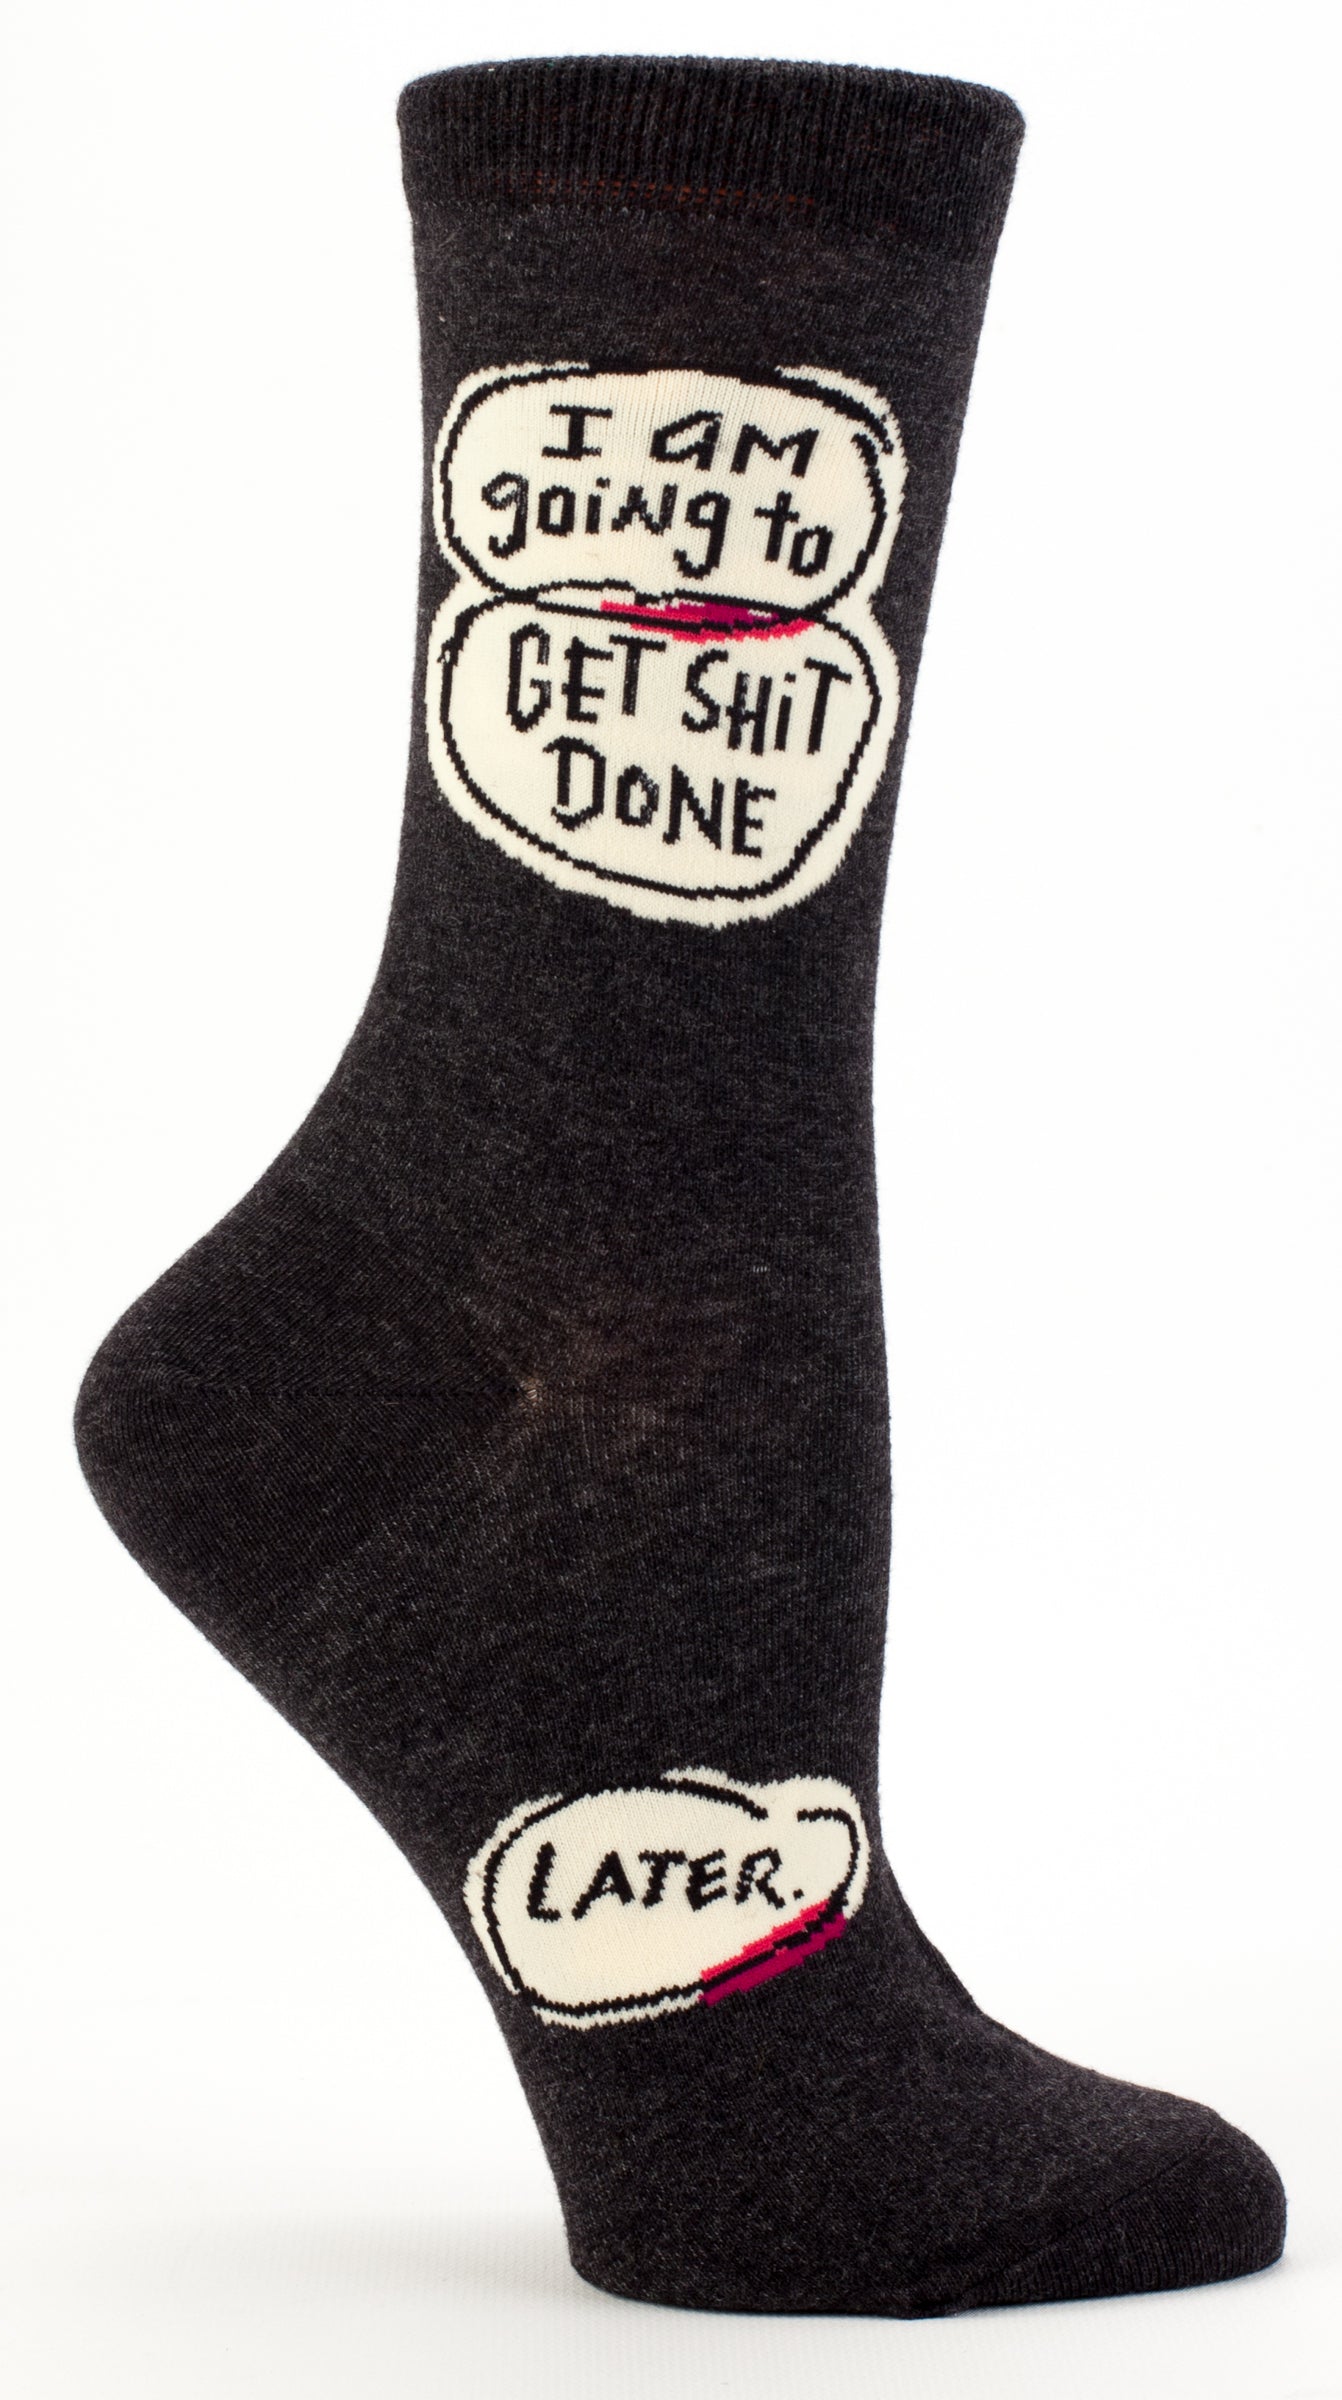 Woman's novelty fun crew sock with legend: "I Am Going To Get Shit Done. Later."